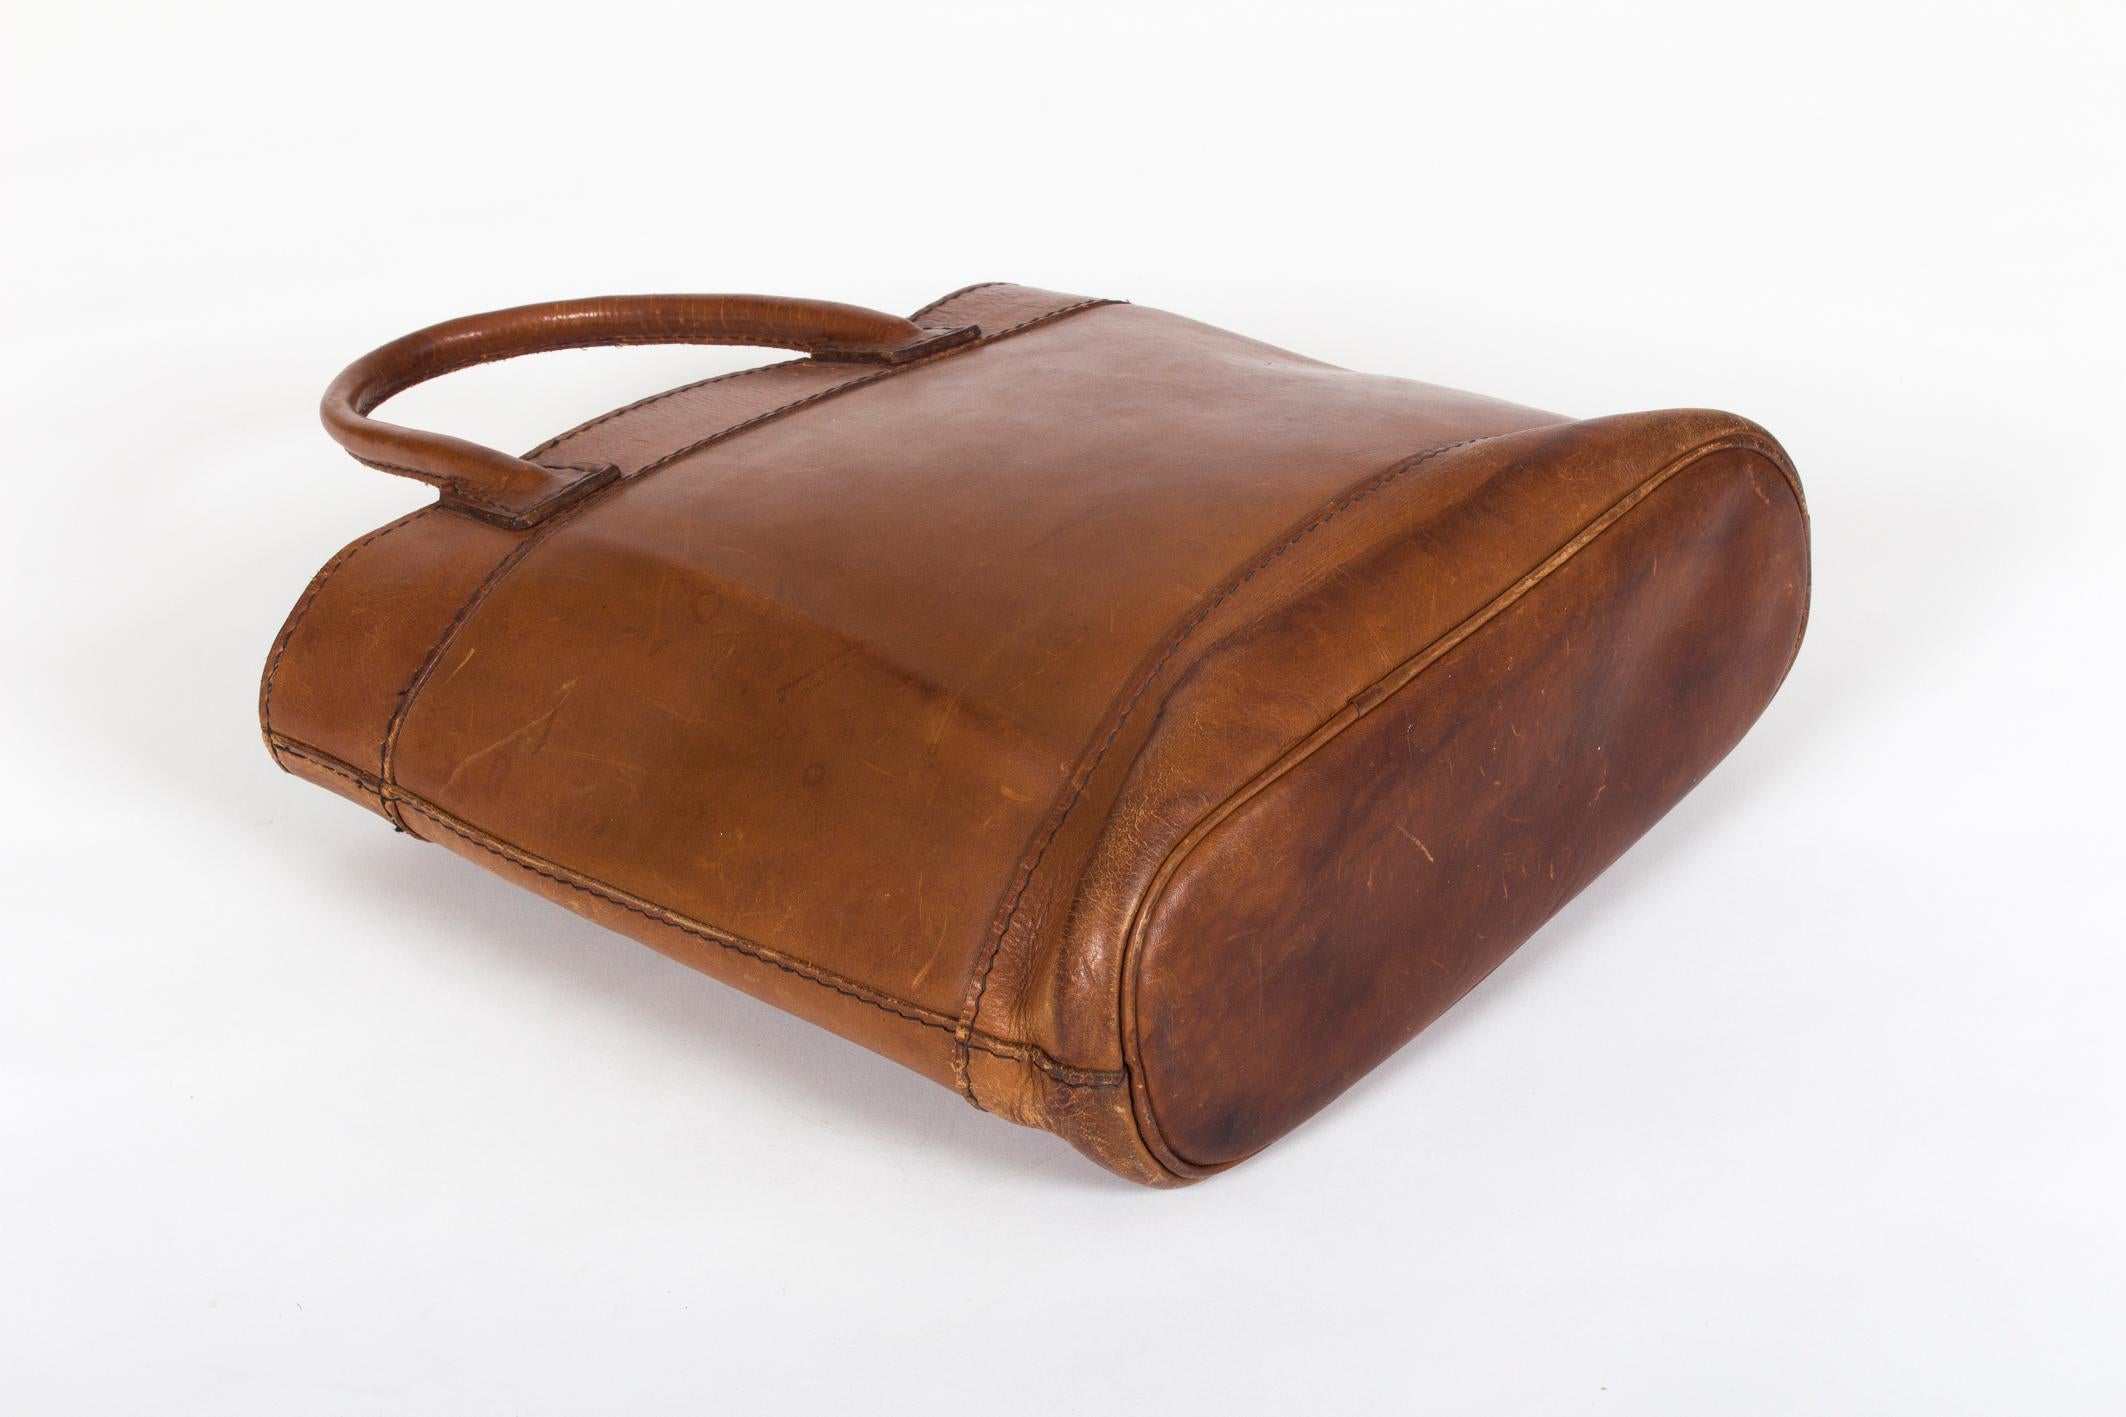 Rare and Marked Collectors Auböck Midcentury Leather Bag, Late 1950s-Early 1960s 3